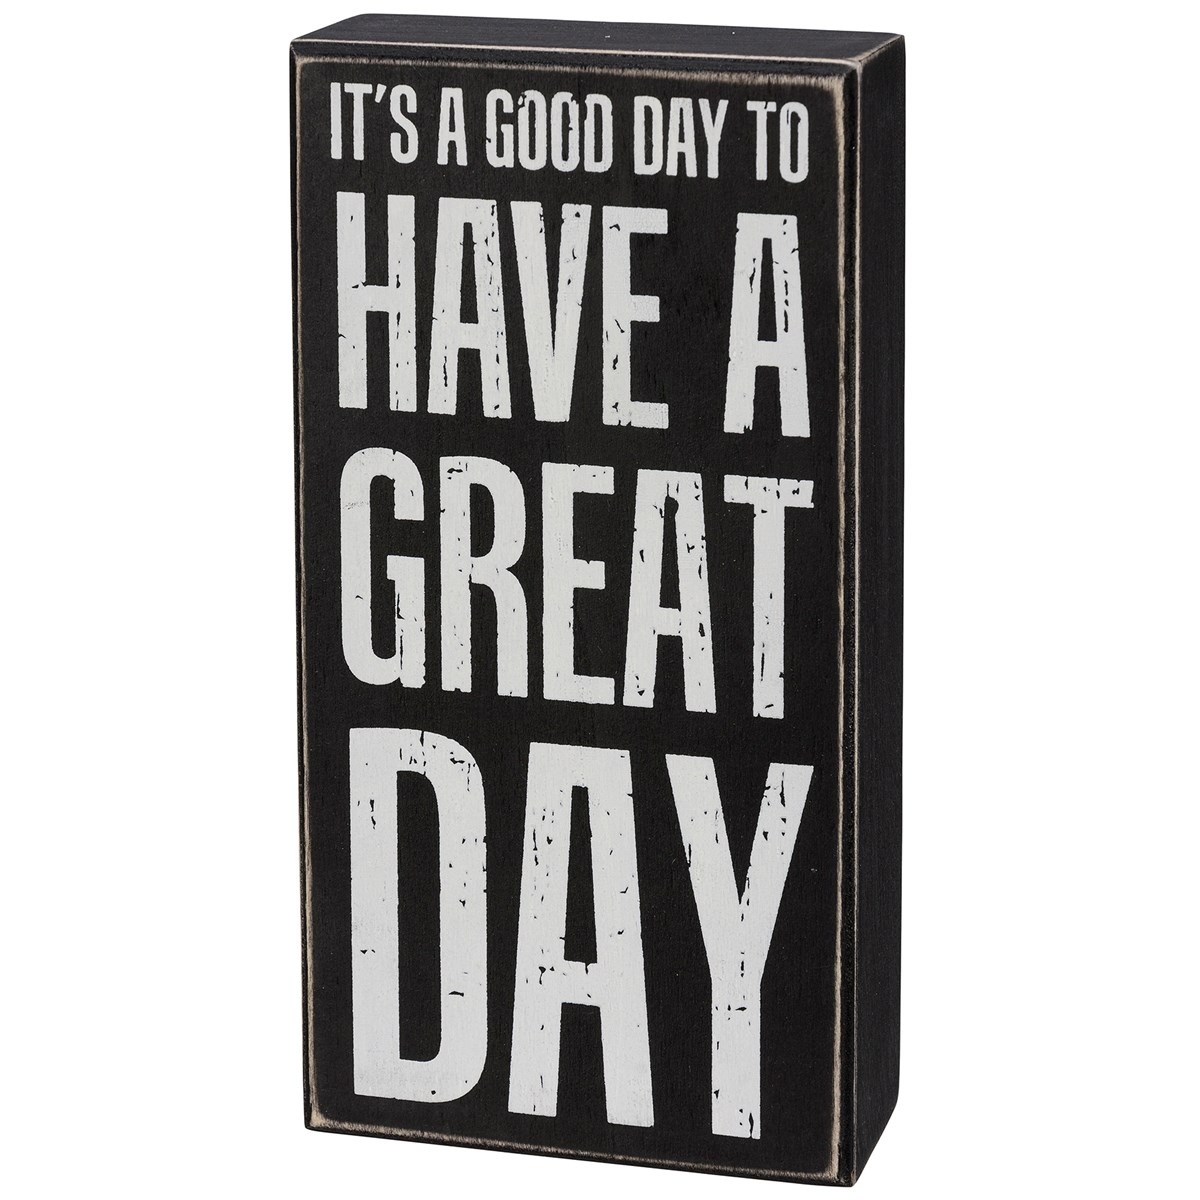 It's A Good Day To Have A Great Day Box Sign - Wood